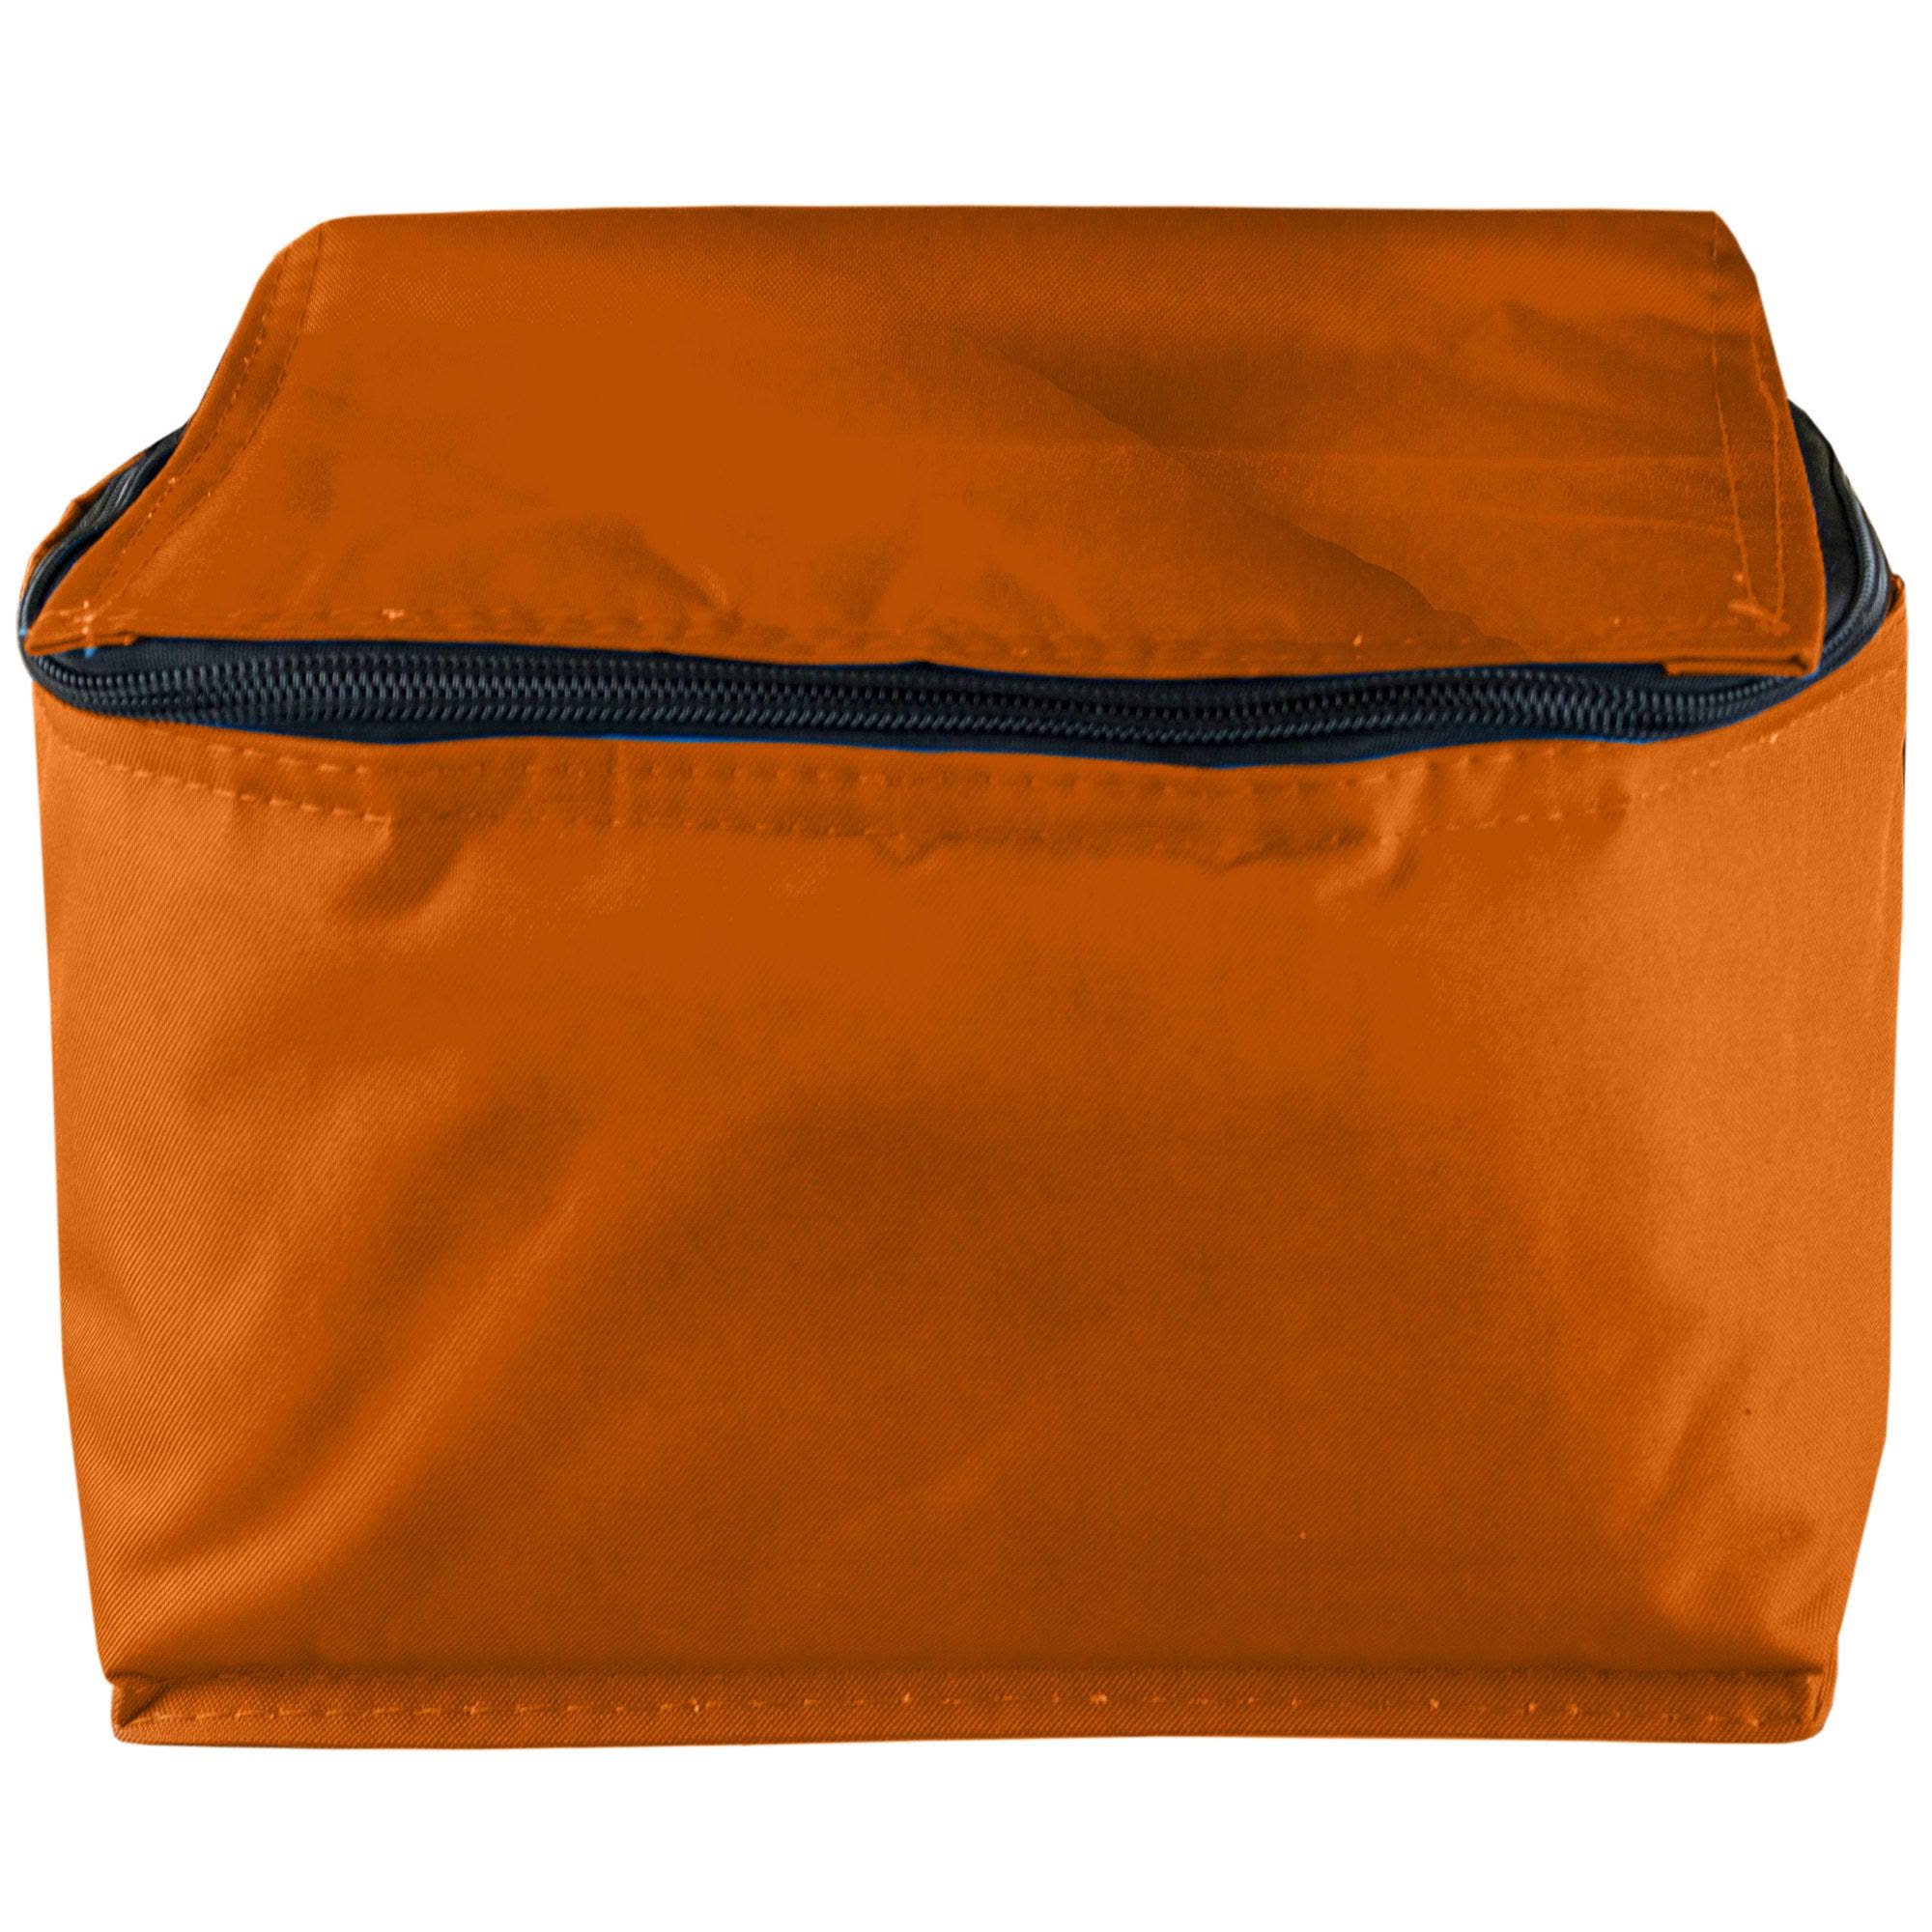 EasyLunchboxes Lunch Tote and Beverage Cooler, Orange | Food Service Equipment & Supplies | Delivery Guaranteed | 30 Day Money Back Guarantee